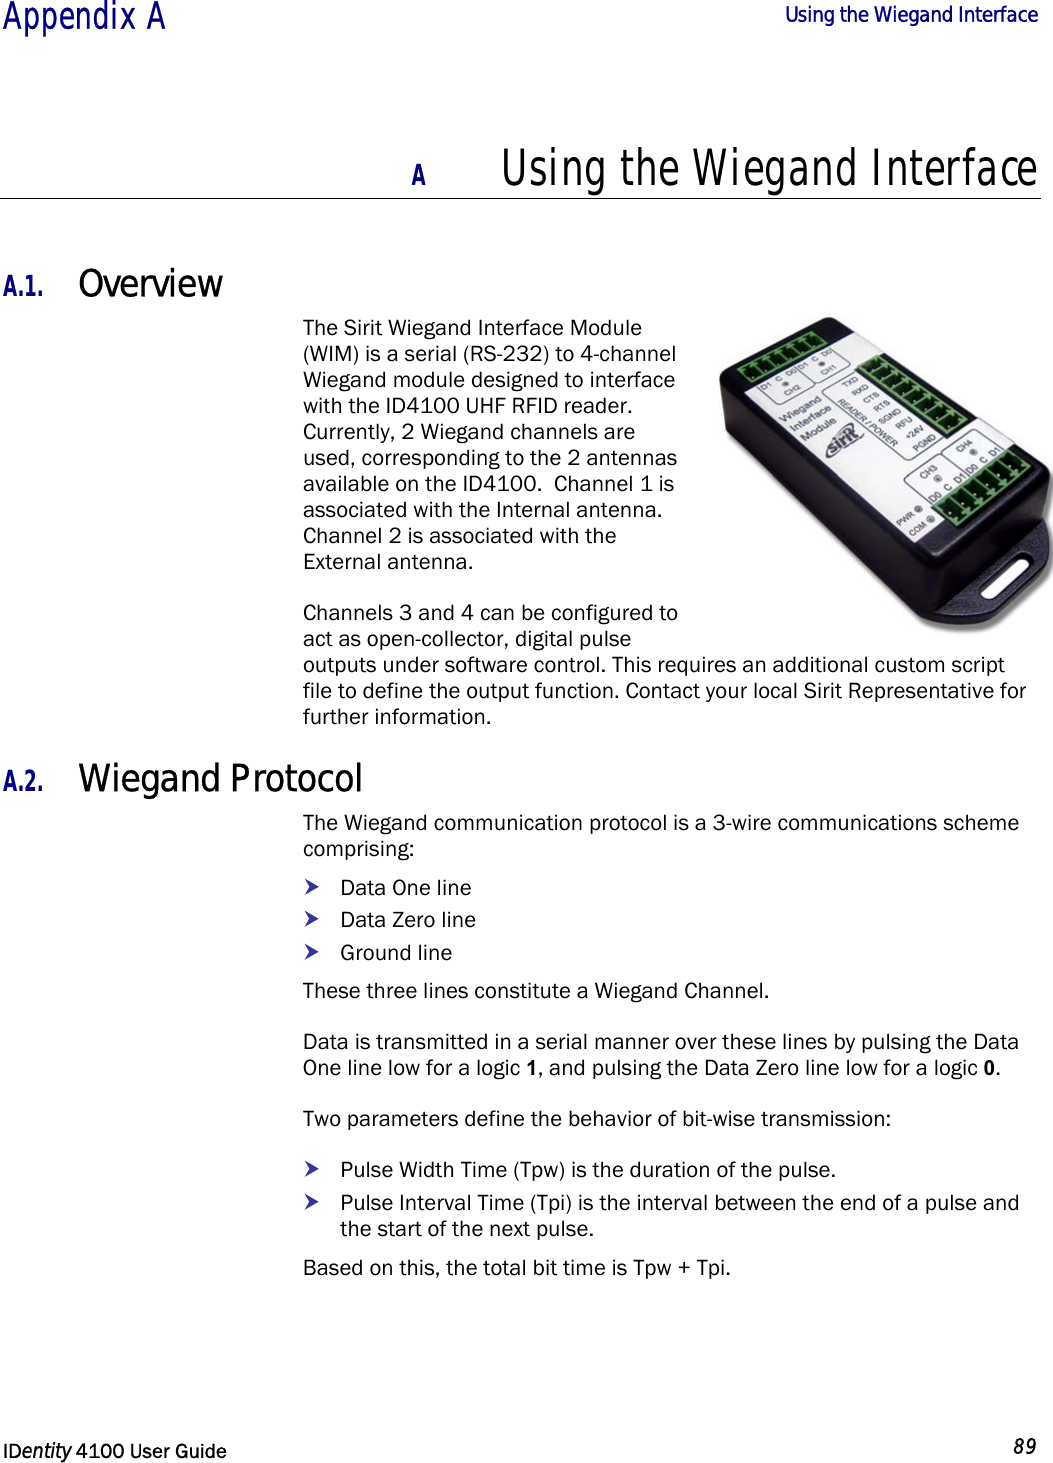  Appendix A  Using the Wiegand Interface   IDentity 4100 User Guide  89  A Using the Wiegand Interface  A.1. Overview The Sirit Wiegand Interface Module (WIM) is a serial (RS-232) to 4-channel Wiegand module designed to interface with the ID4100 UHF RFID reader.  Currently, 2 Wiegand channels are used, corresponding to the 2 antennas available on the ID4100.  Channel 1 is associated with the Internal antenna. Channel 2 is associated with the External antenna. Channels 3 and 4 can be configured to act as open-collector, digital pulse outputs under software control. This requires an additional custom script file to define the output function. Contact your local Sirit Representative for further information. A.2. Wiegand Protocol The Wiegand communication protocol is a 3-wire communications scheme comprising: h Data One line h Data Zero line h Ground line These three lines constitute a Wiegand Channel. Data is transmitted in a serial manner over these lines by pulsing the Data One line low for a logic 1, and pulsing the Data Zero line low for a logic 0. Two parameters define the behavior of bit-wise transmission: h Pulse Width Time (Tpw) is the duration of the pulse. h Pulse Interval Time (Tpi) is the interval between the end of a pulse and the start of the next pulse. Based on this, the total bit time is Tpw + Tpi. 